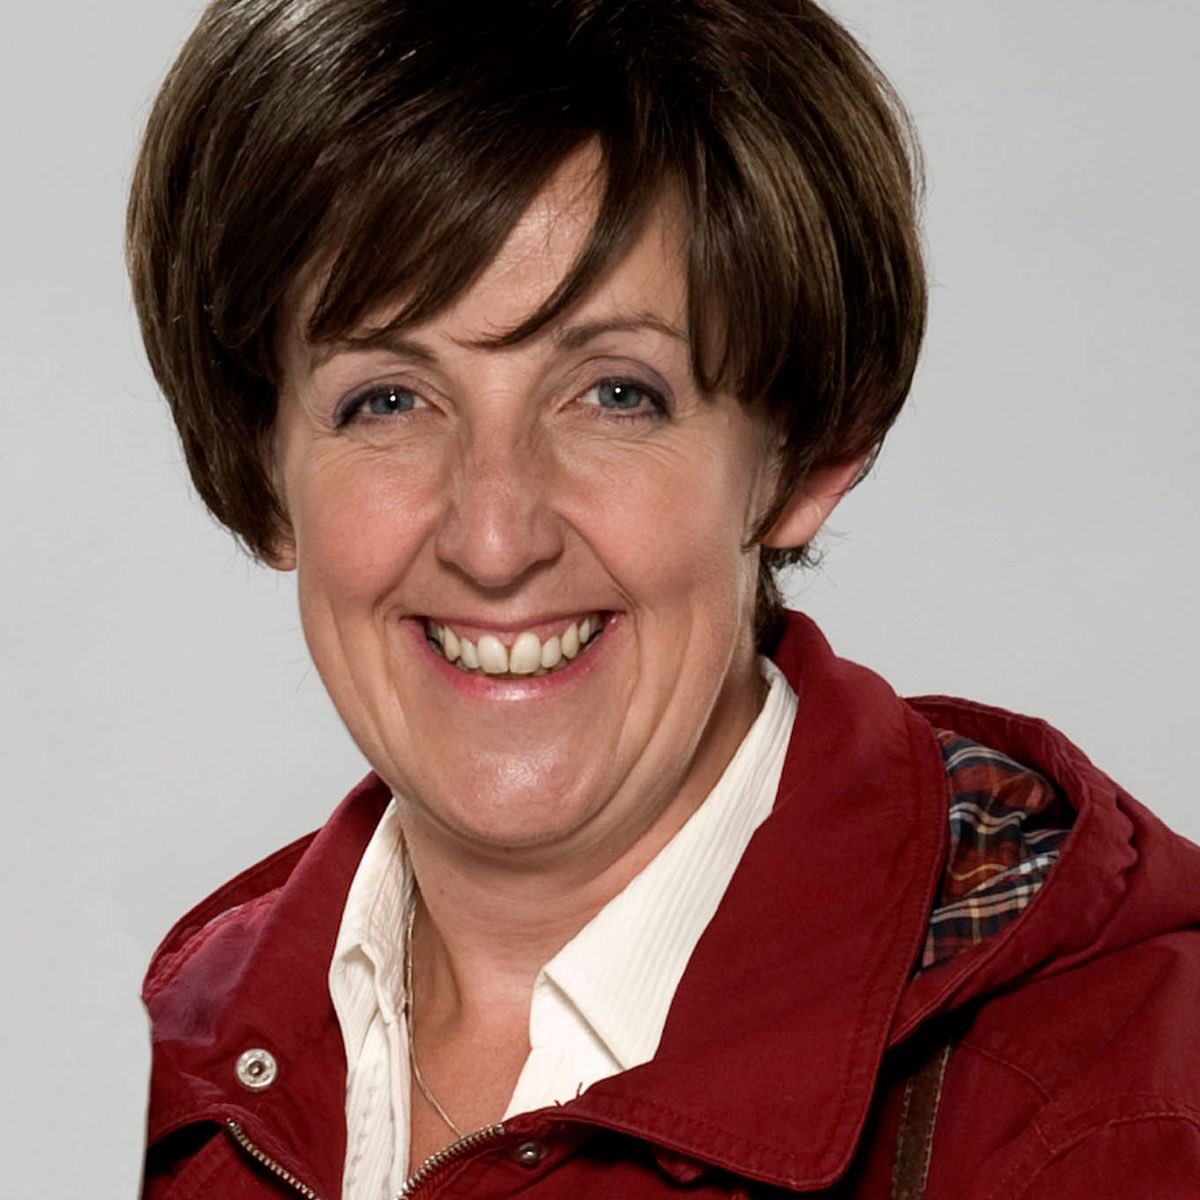 33. Hayley Cropper. Hayley’s first and final stories were her biggest Corrie moments. The revelation she was transsexual was groundbreaking. And her death was very moving. In between she formed a great double act with soul mate Roy and was a warm presence on the show  #MyCorrie60